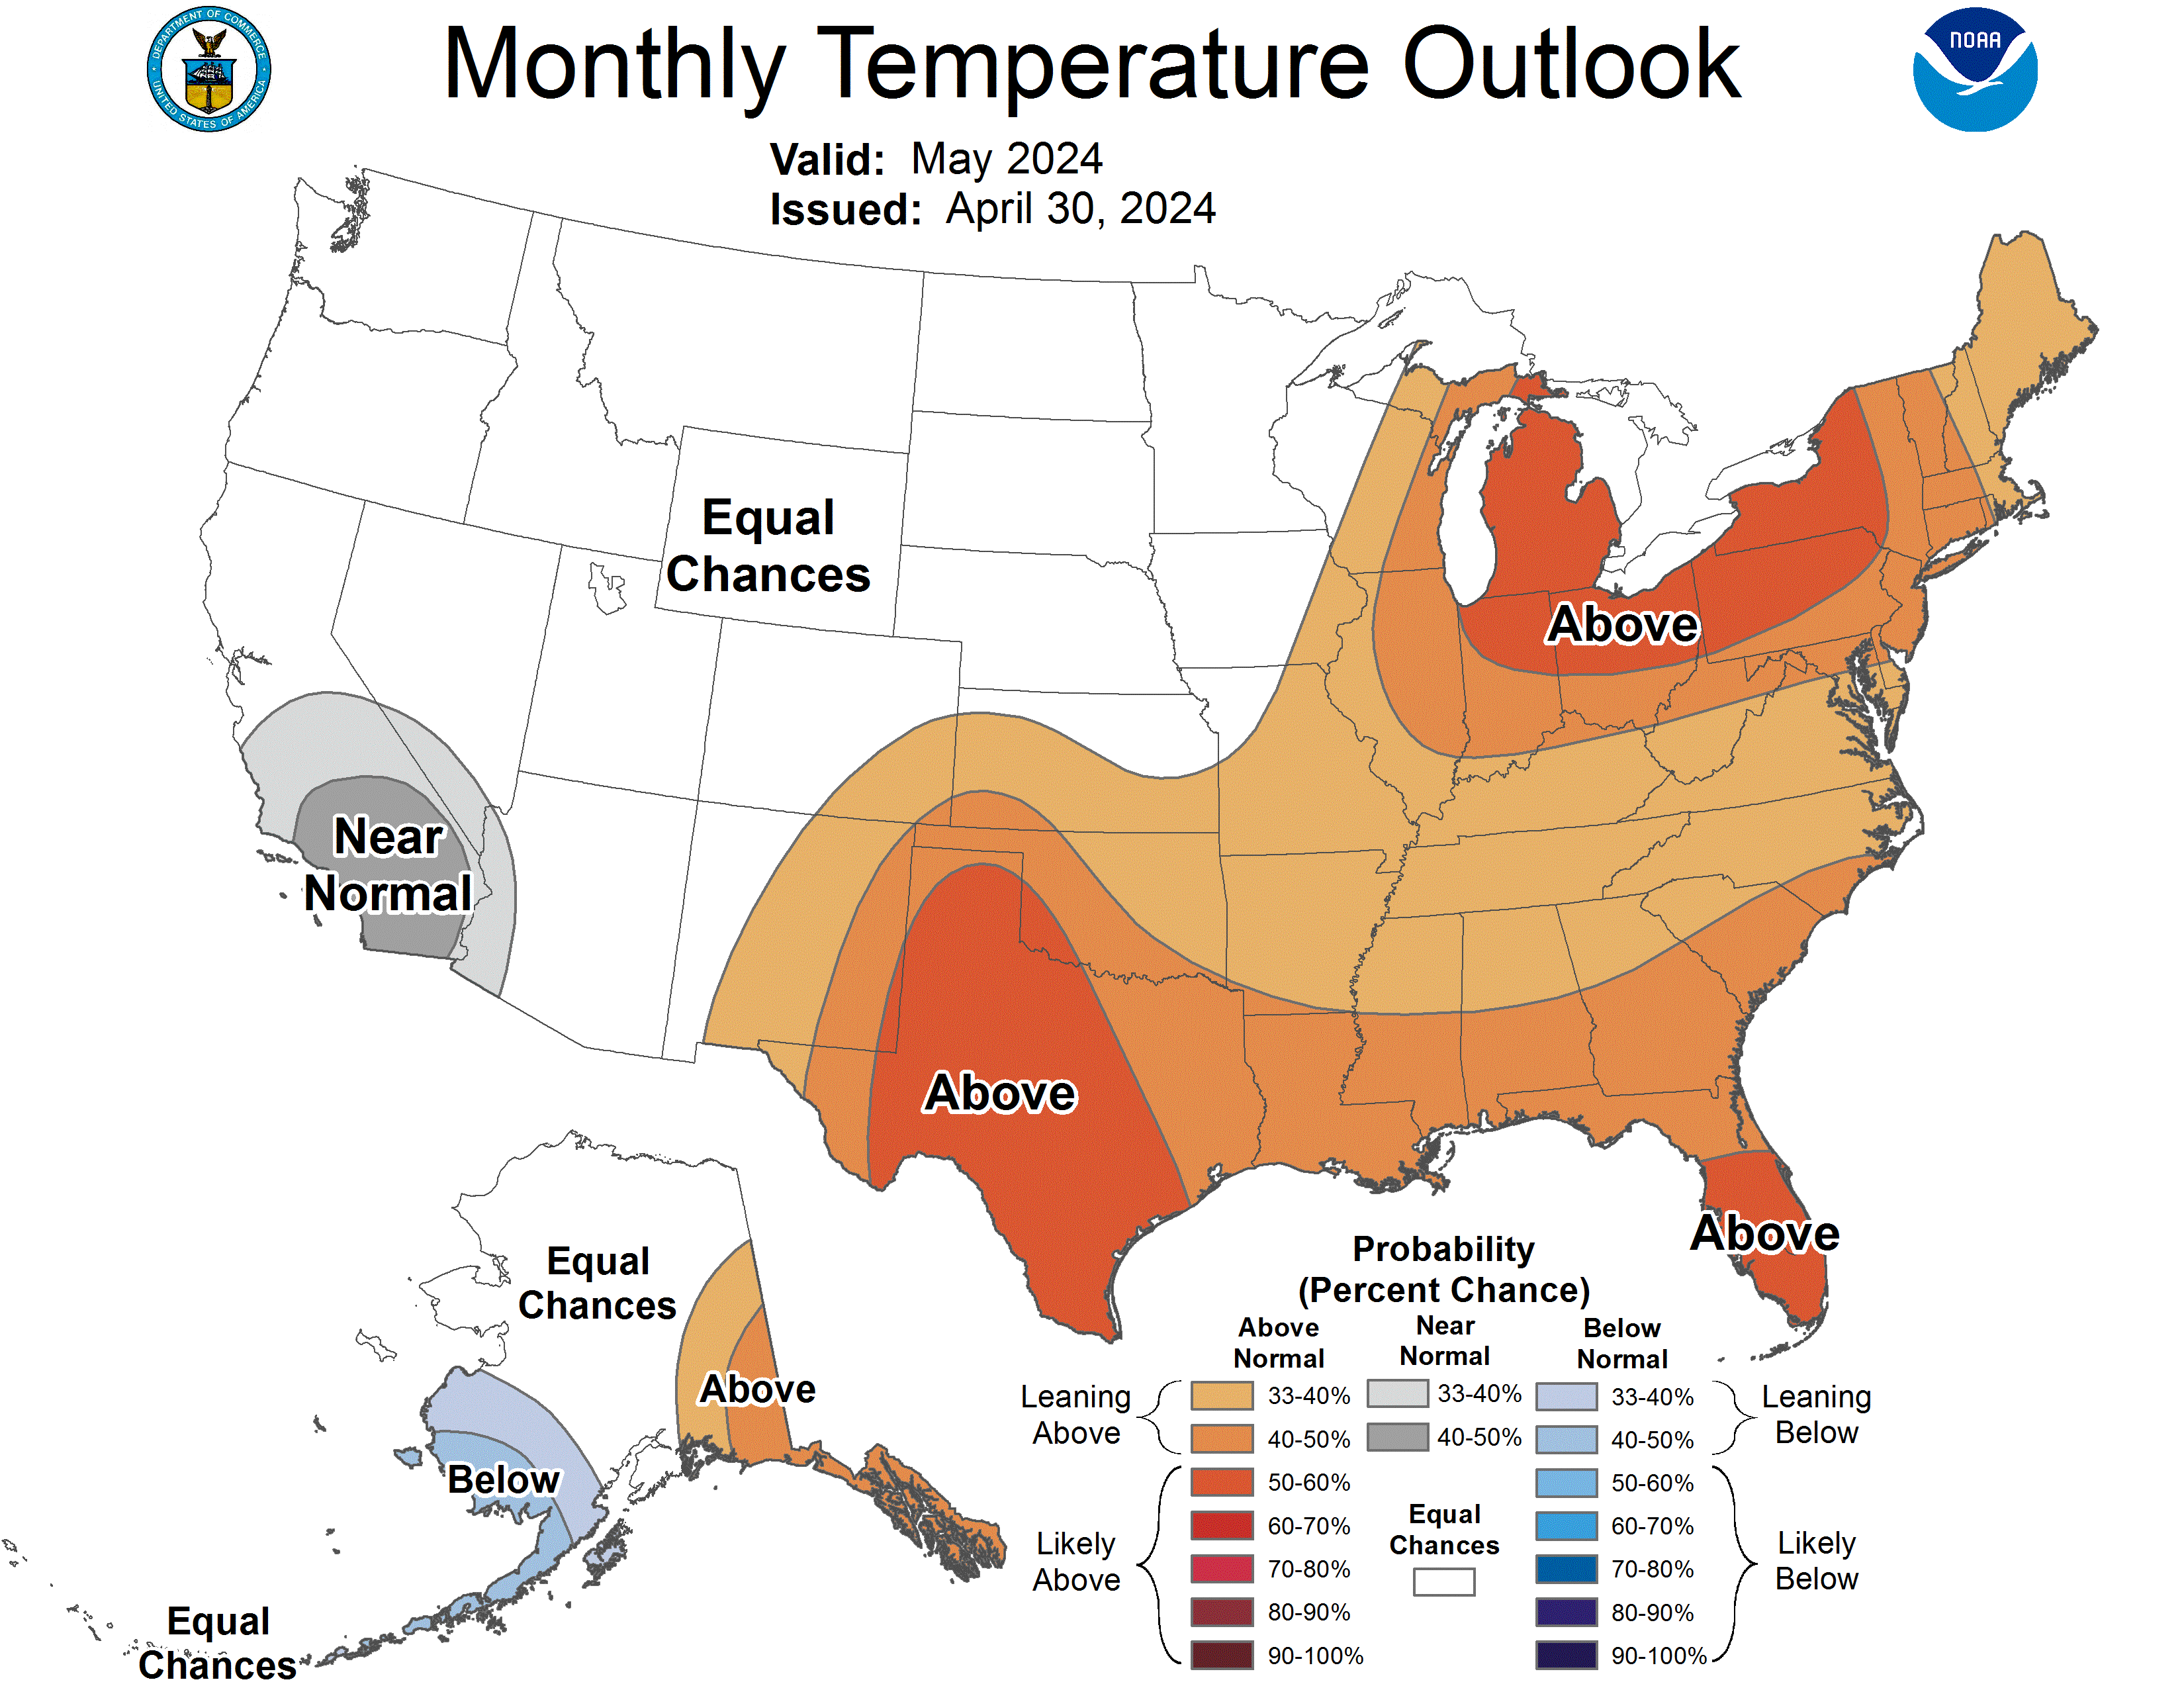 https://www.cpc.ncep.noaa.gov/products/predictions/long_range/lead14/off15_temp.gif